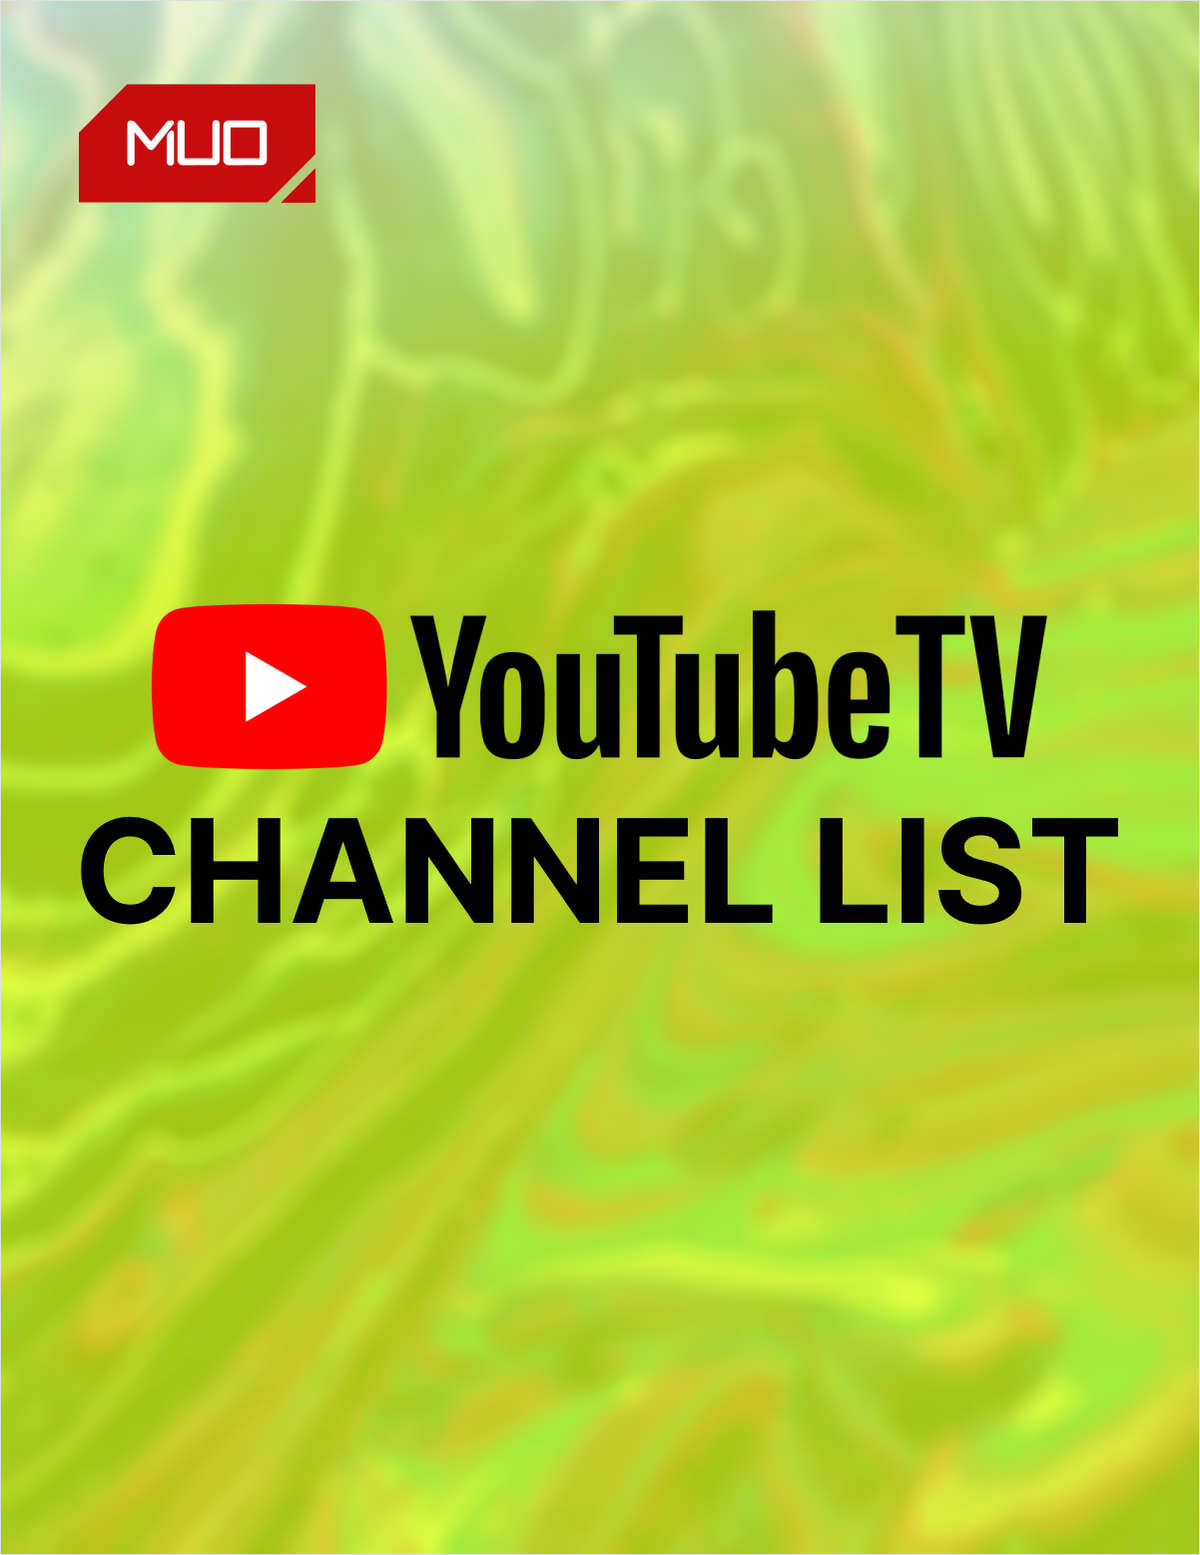 YouTube TV Channel List and Pricing Guide